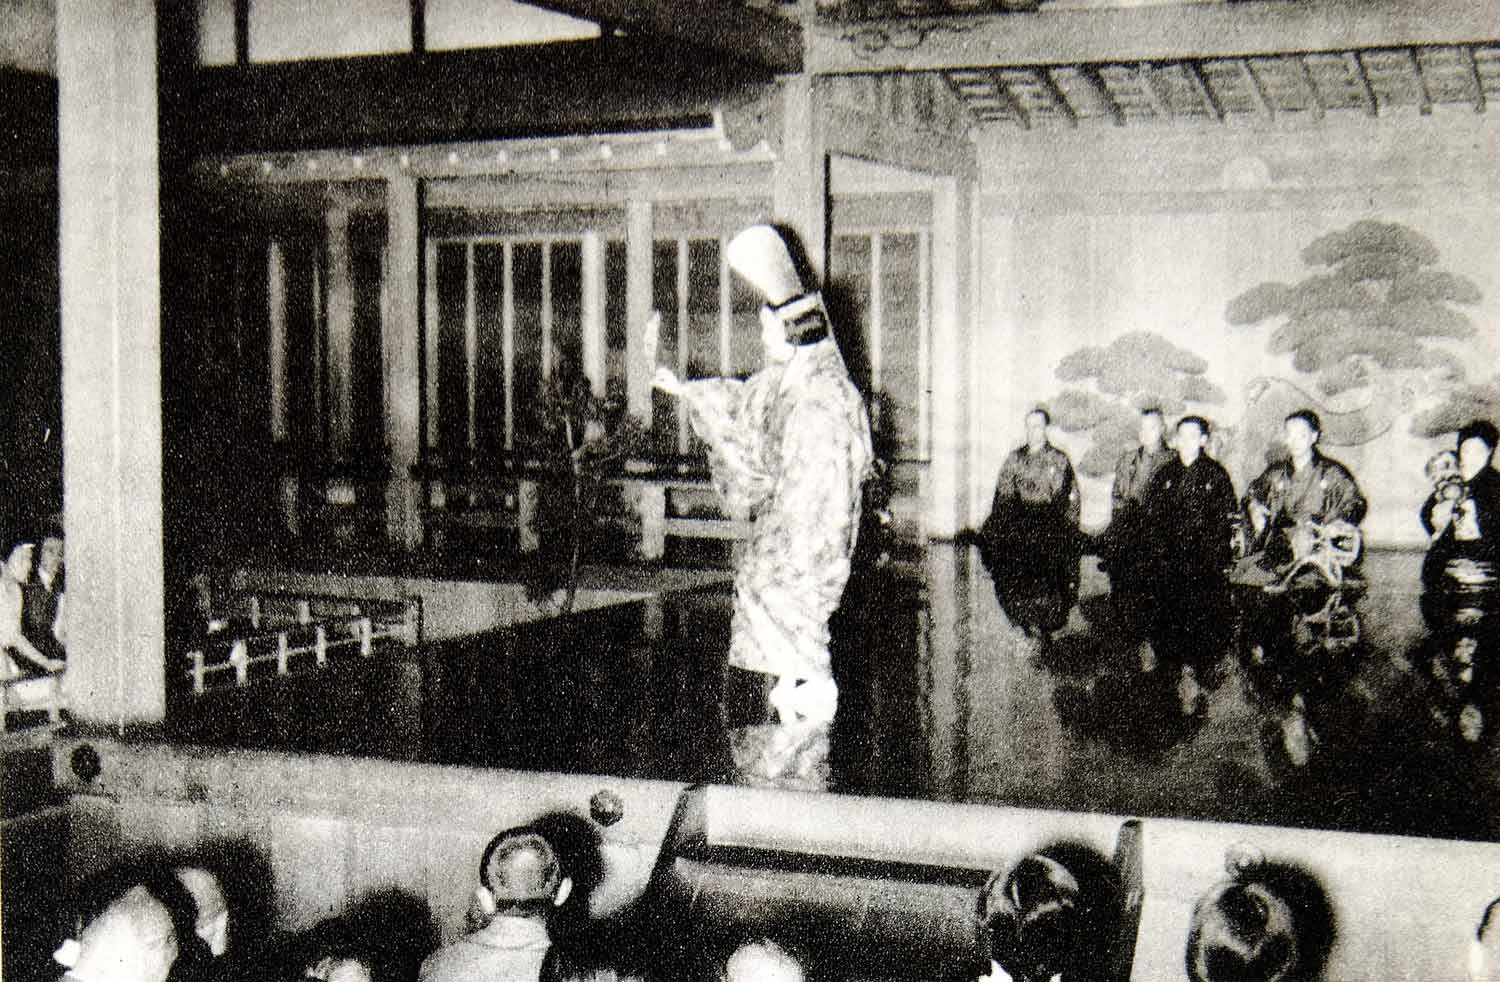 1952 Rotogravure Noh Theater Japanese Actor Pantomime Stage Traditional XGBD4